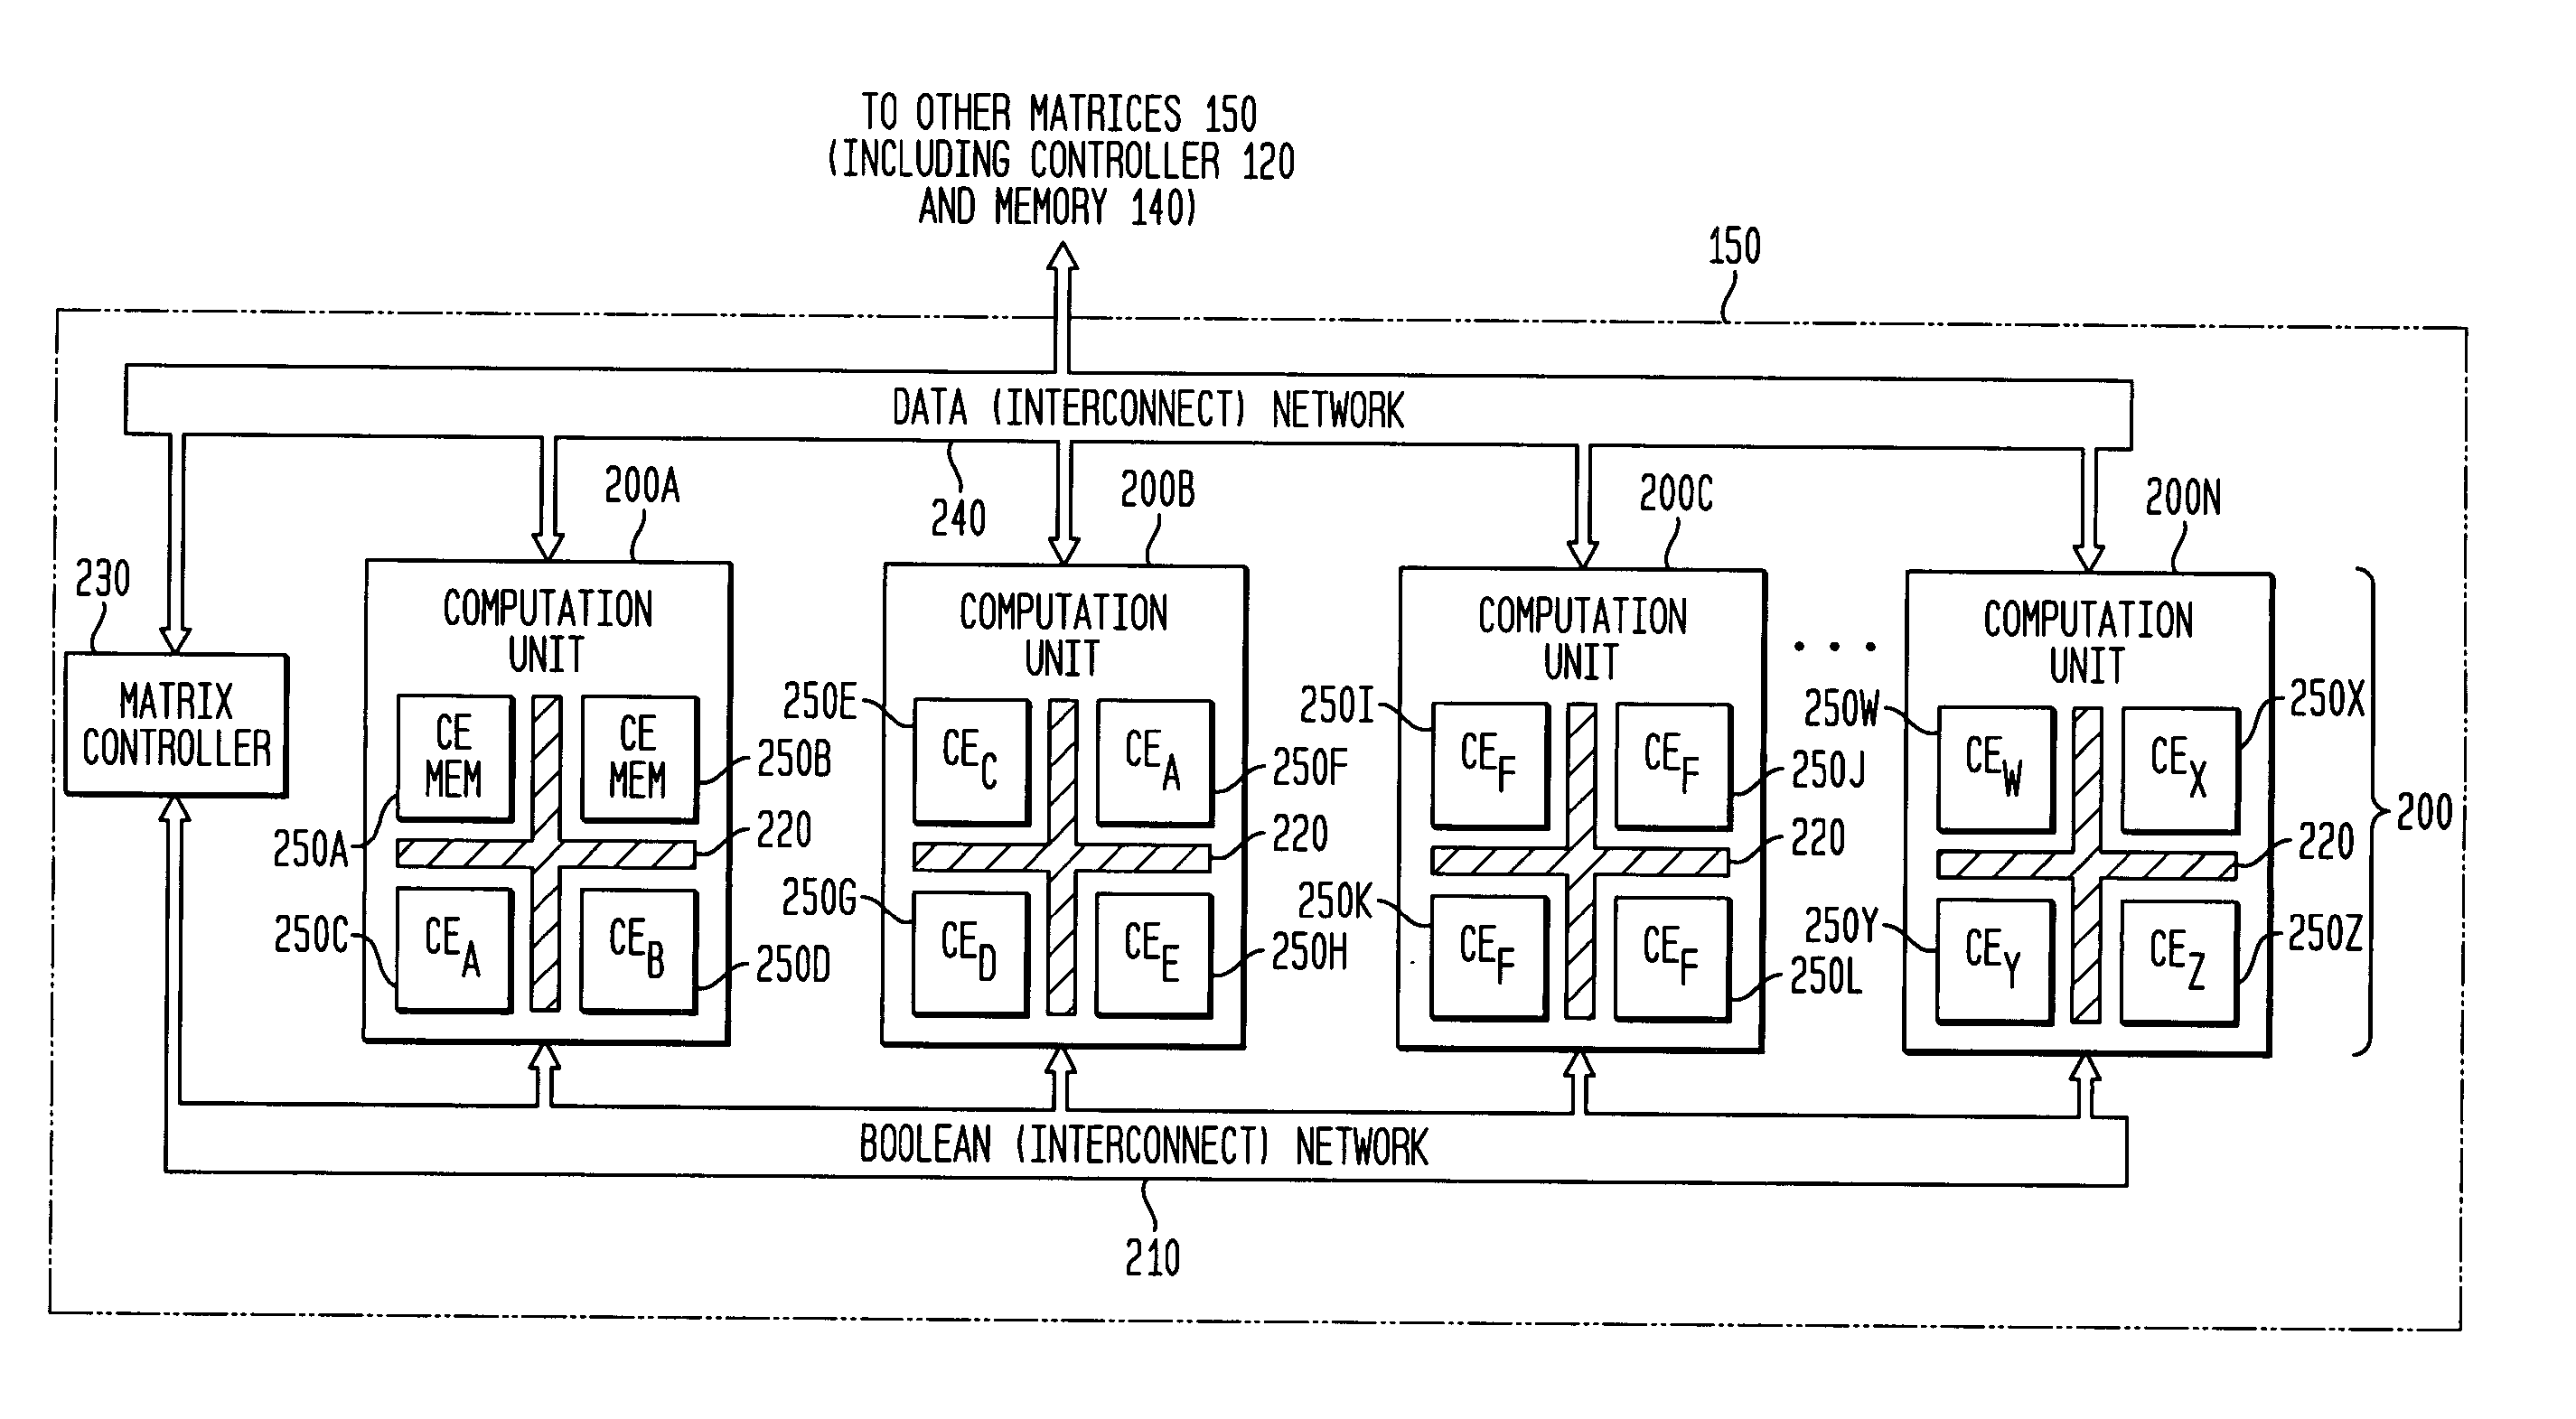 Asynchronous, independent and multiple process shared memory system in an adaptive computing architecture